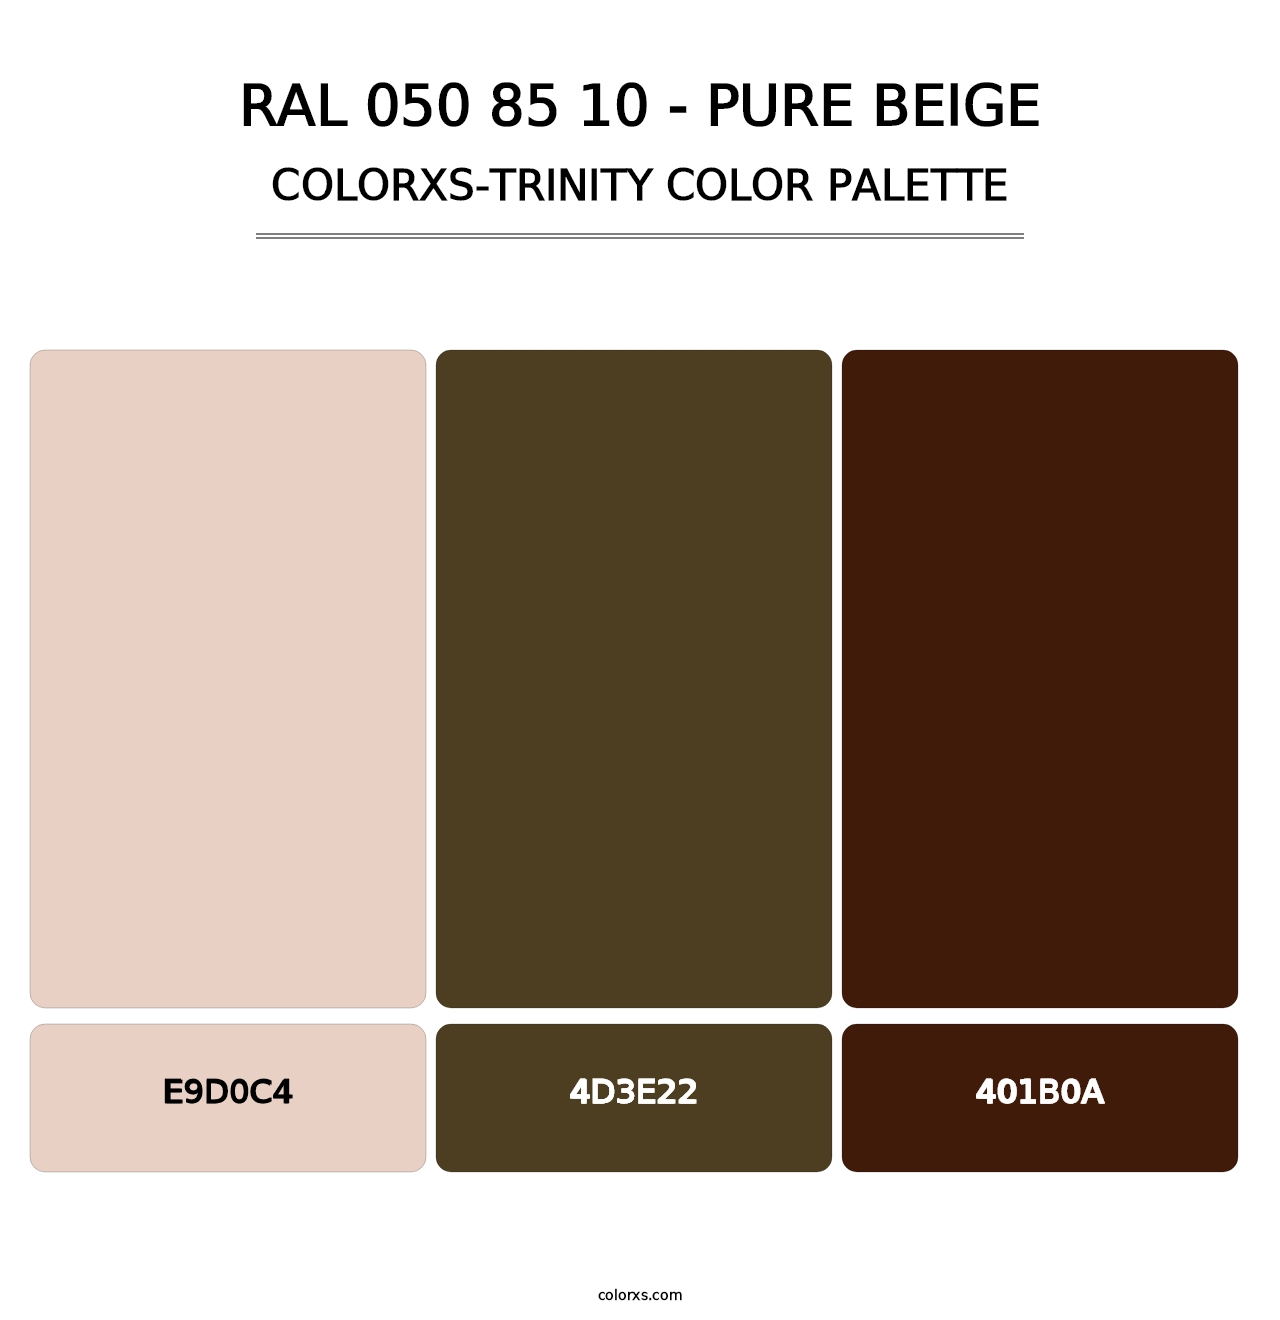 RAL 050 85 10 - Pure Beige - Colorxs Trinity Palette